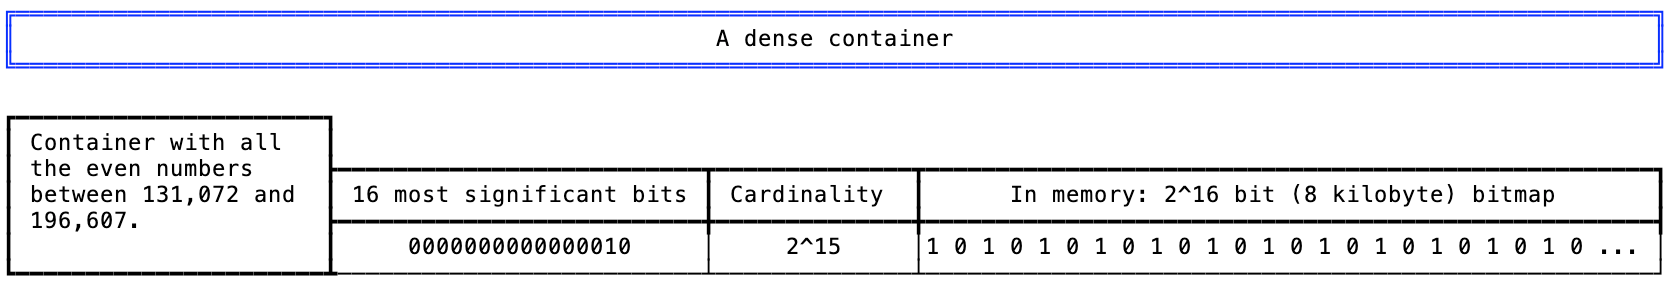 An illustration of a dense Roaring bitmap container from Figure 2 alongside an example of how it is stored in memory.